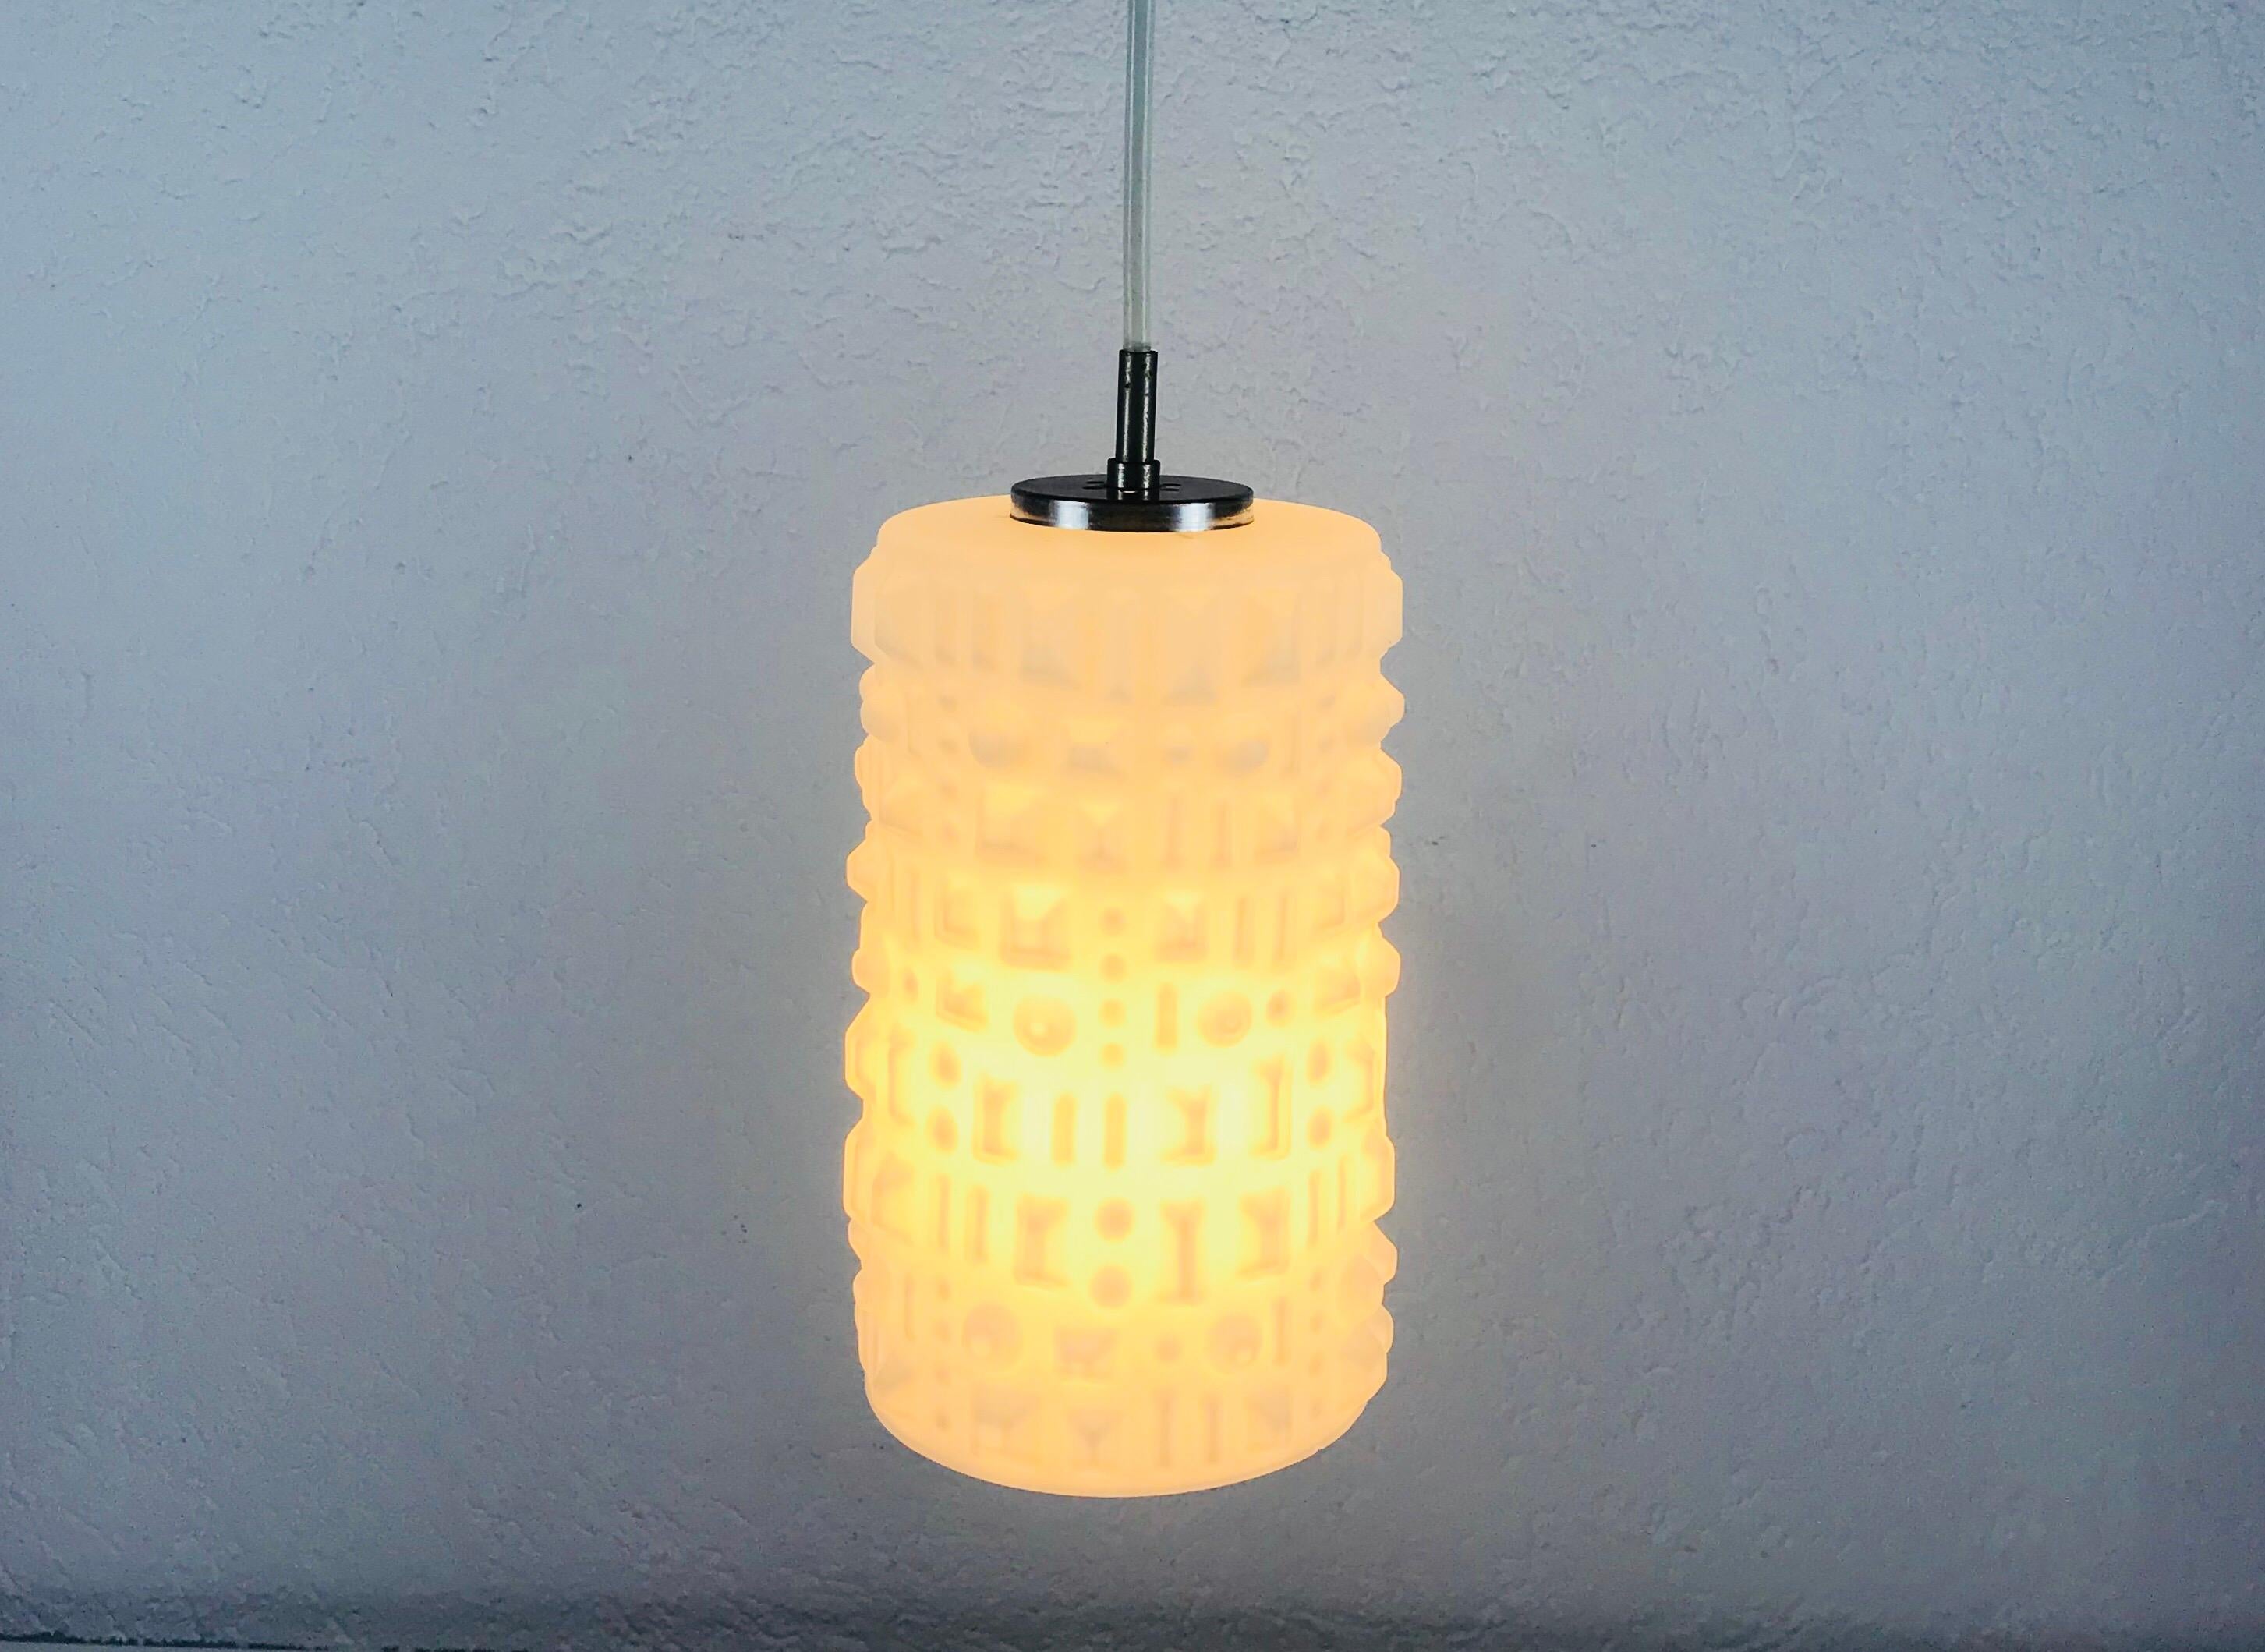 A Peill and Putzler hanging lamp made in Germany in the 1970s. It is fascinating with its glass ornaments. Textured opaline glass with aluminium top.

Measurements:

Height: 67 cm

Diameter: 13 cm

The light requires one E14 light bulb.